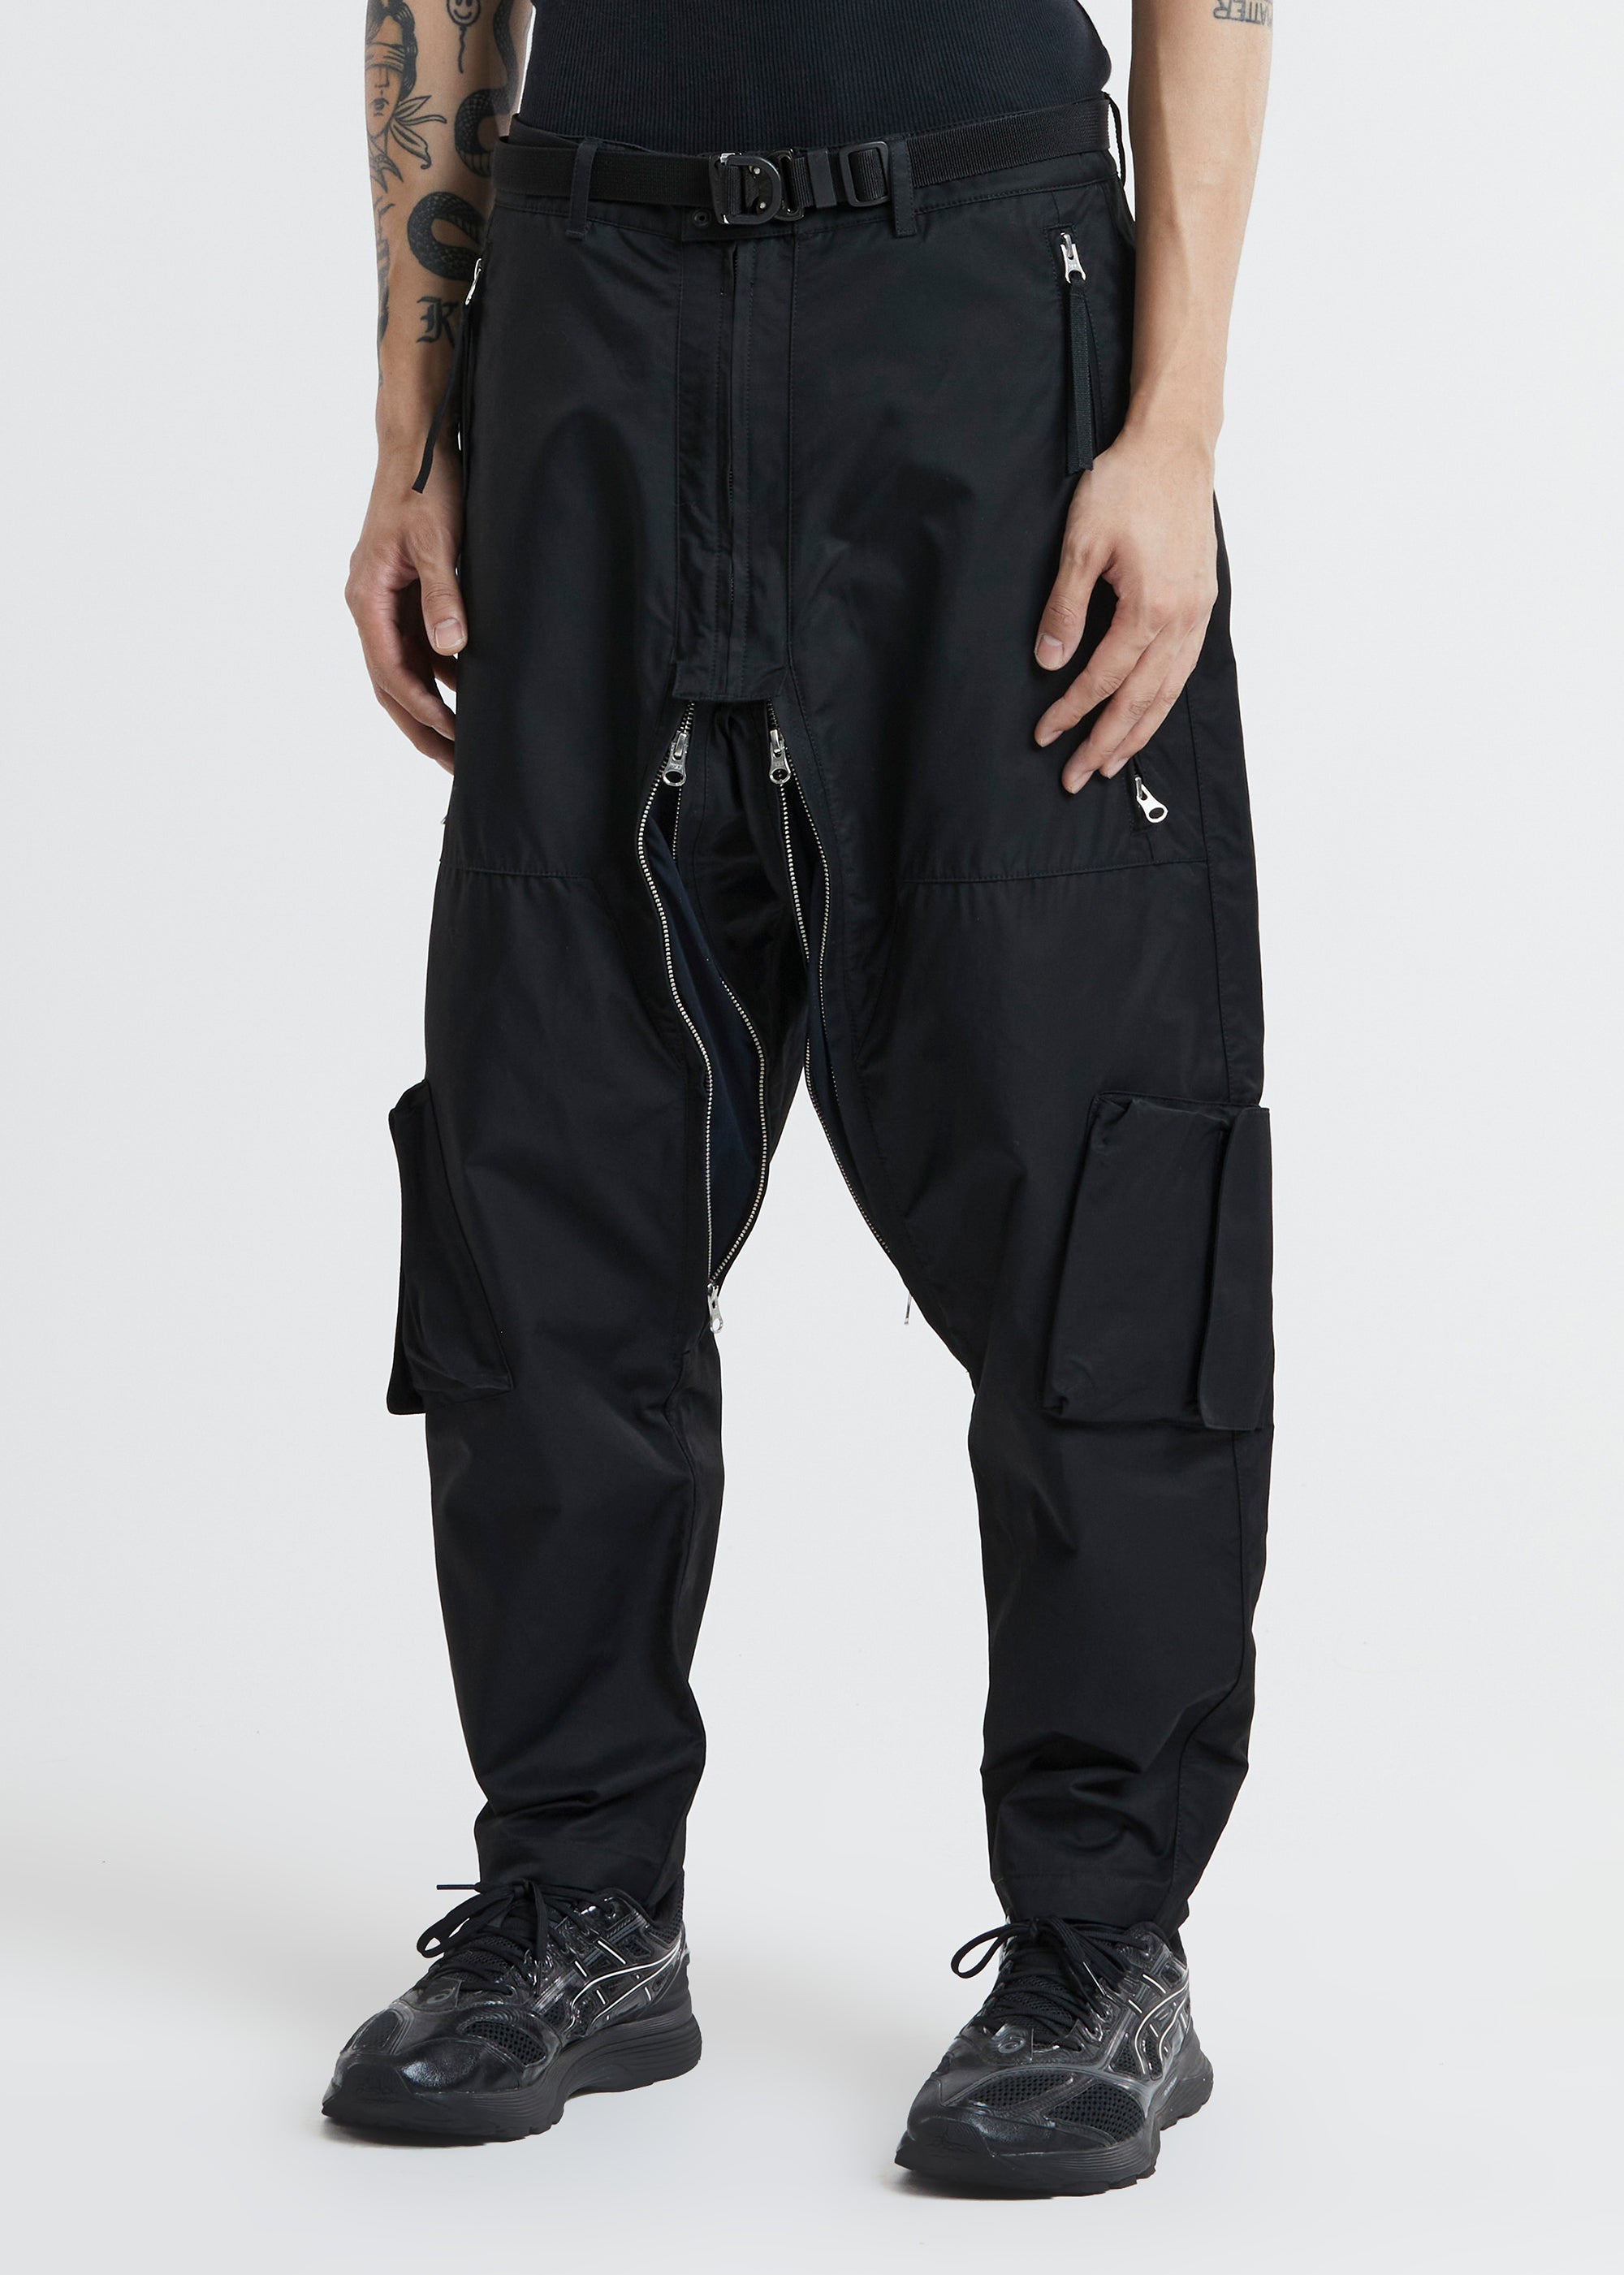 DWR ARTICULATED MILITARY PANTS - Nilmance